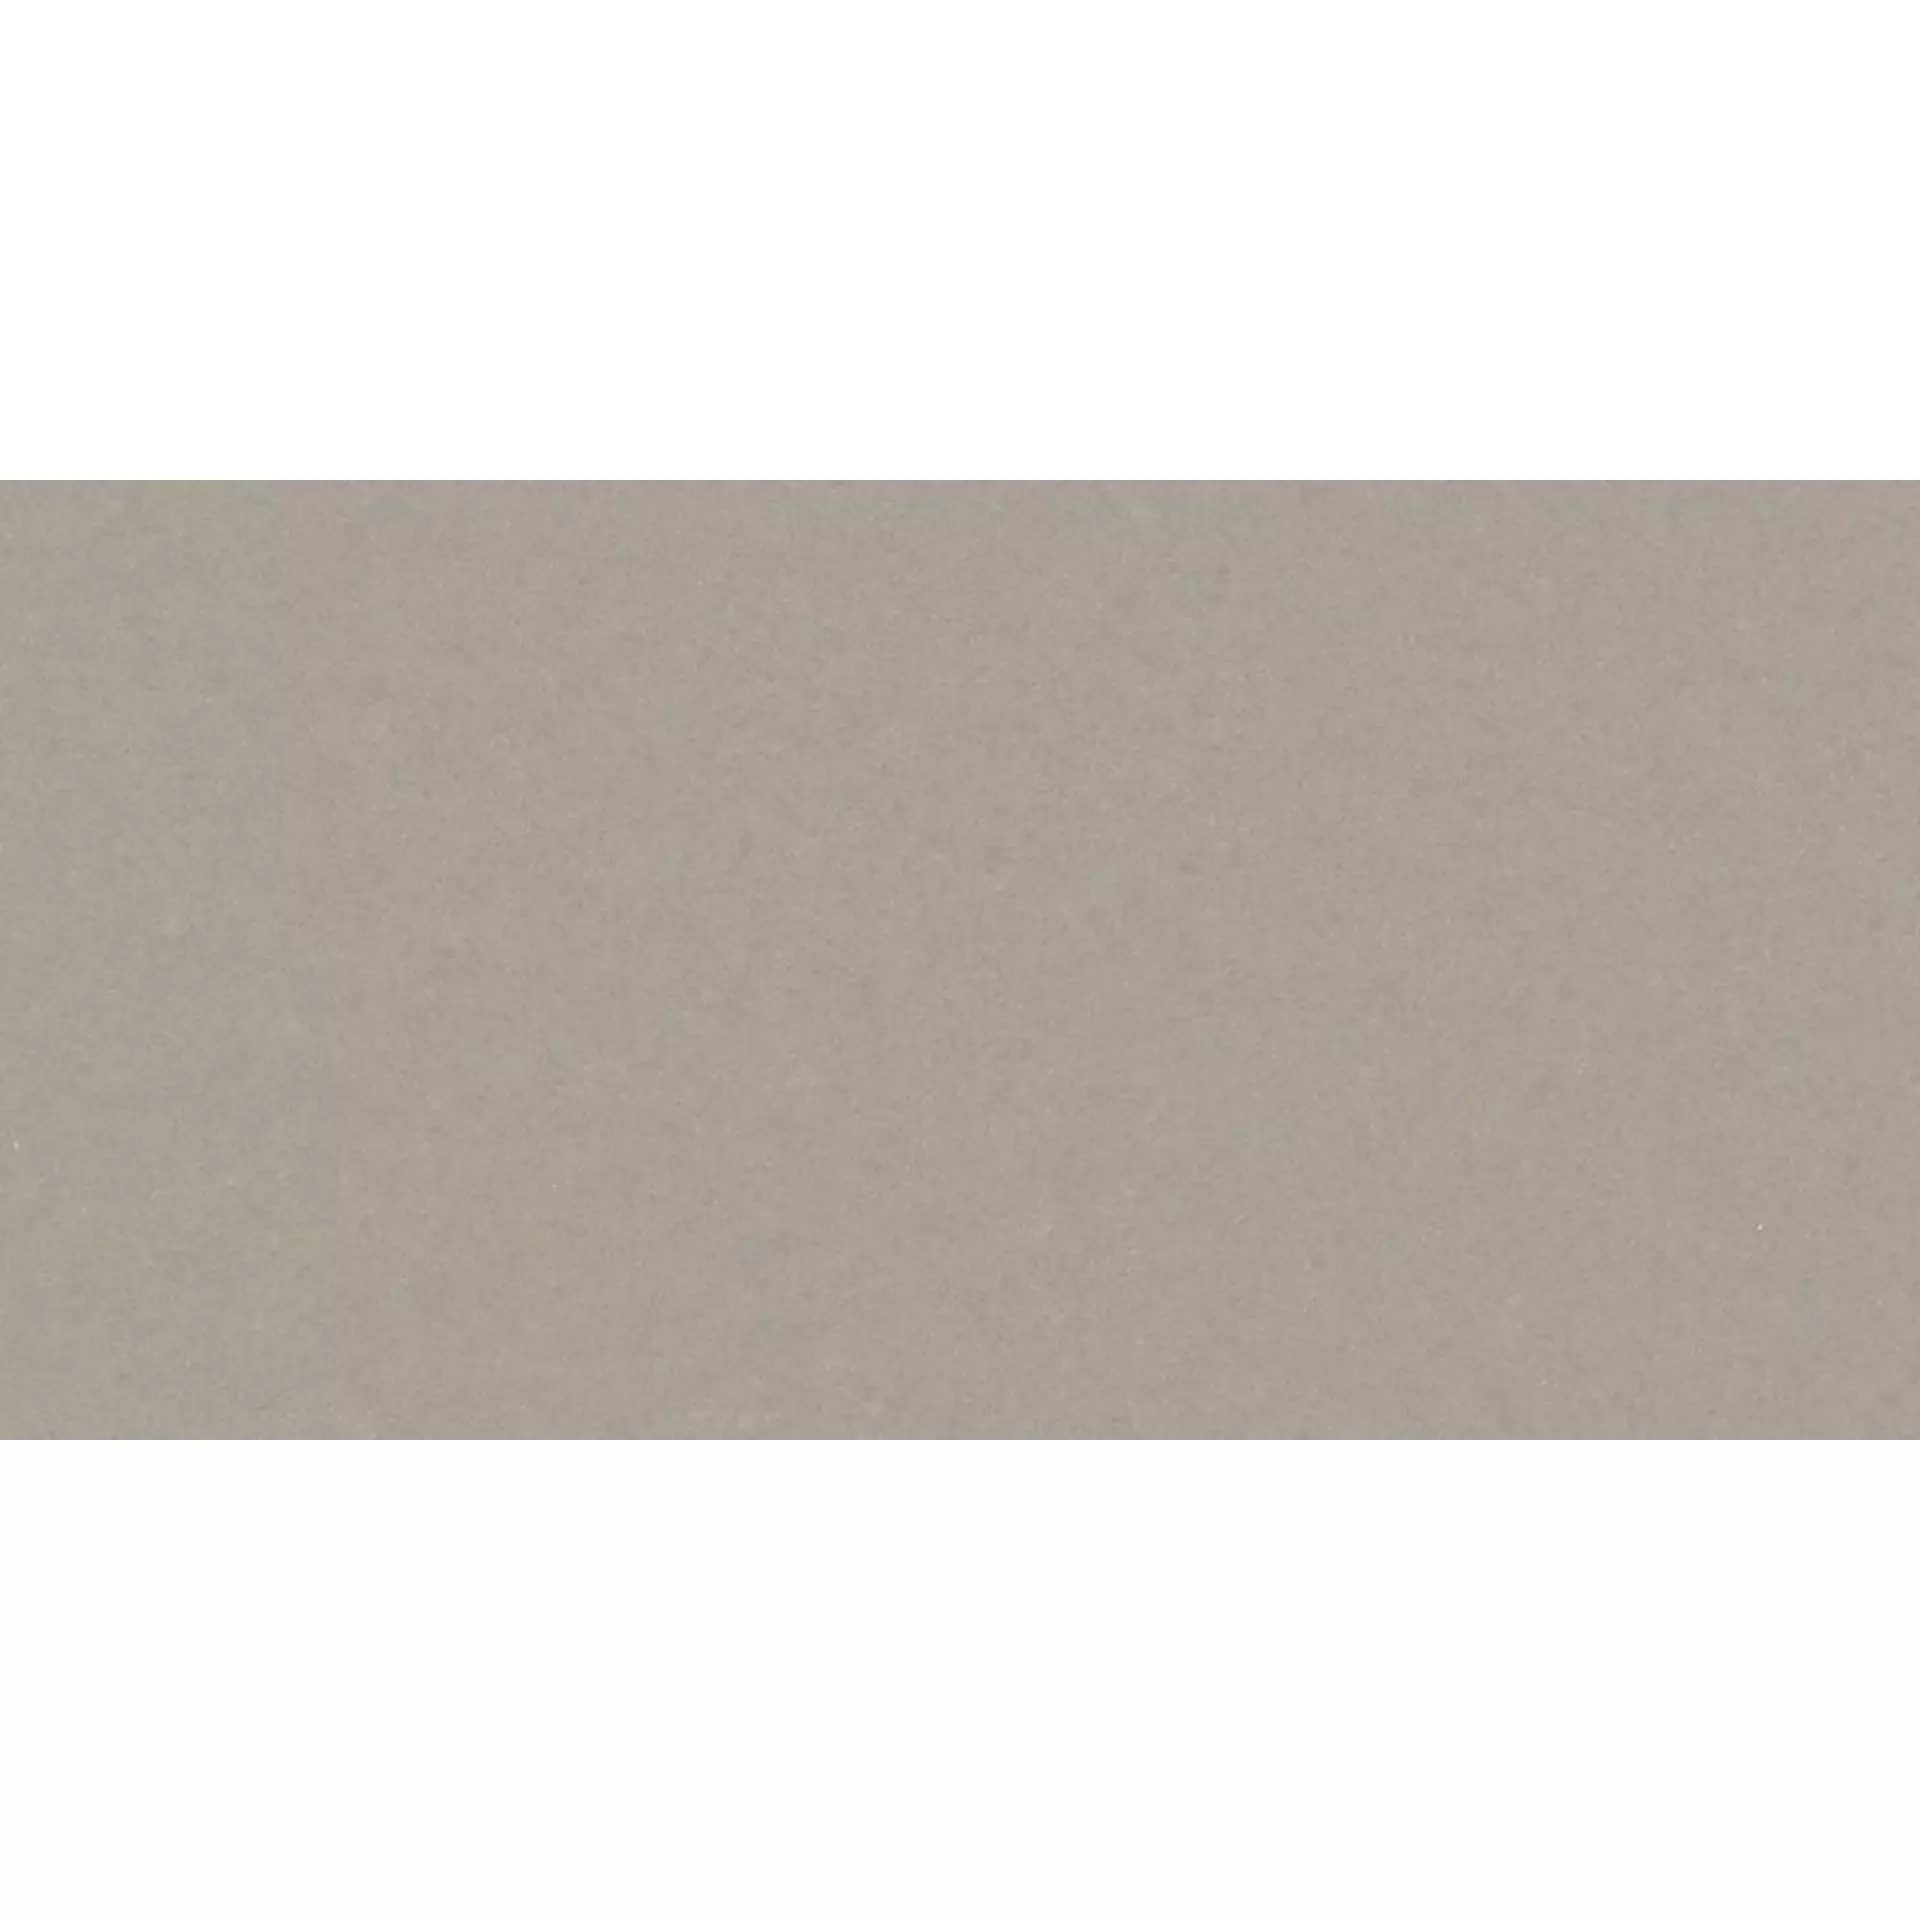 Blustyle Blutech Cemento Lappato BC-BT45 30x60cm rectified 10mm